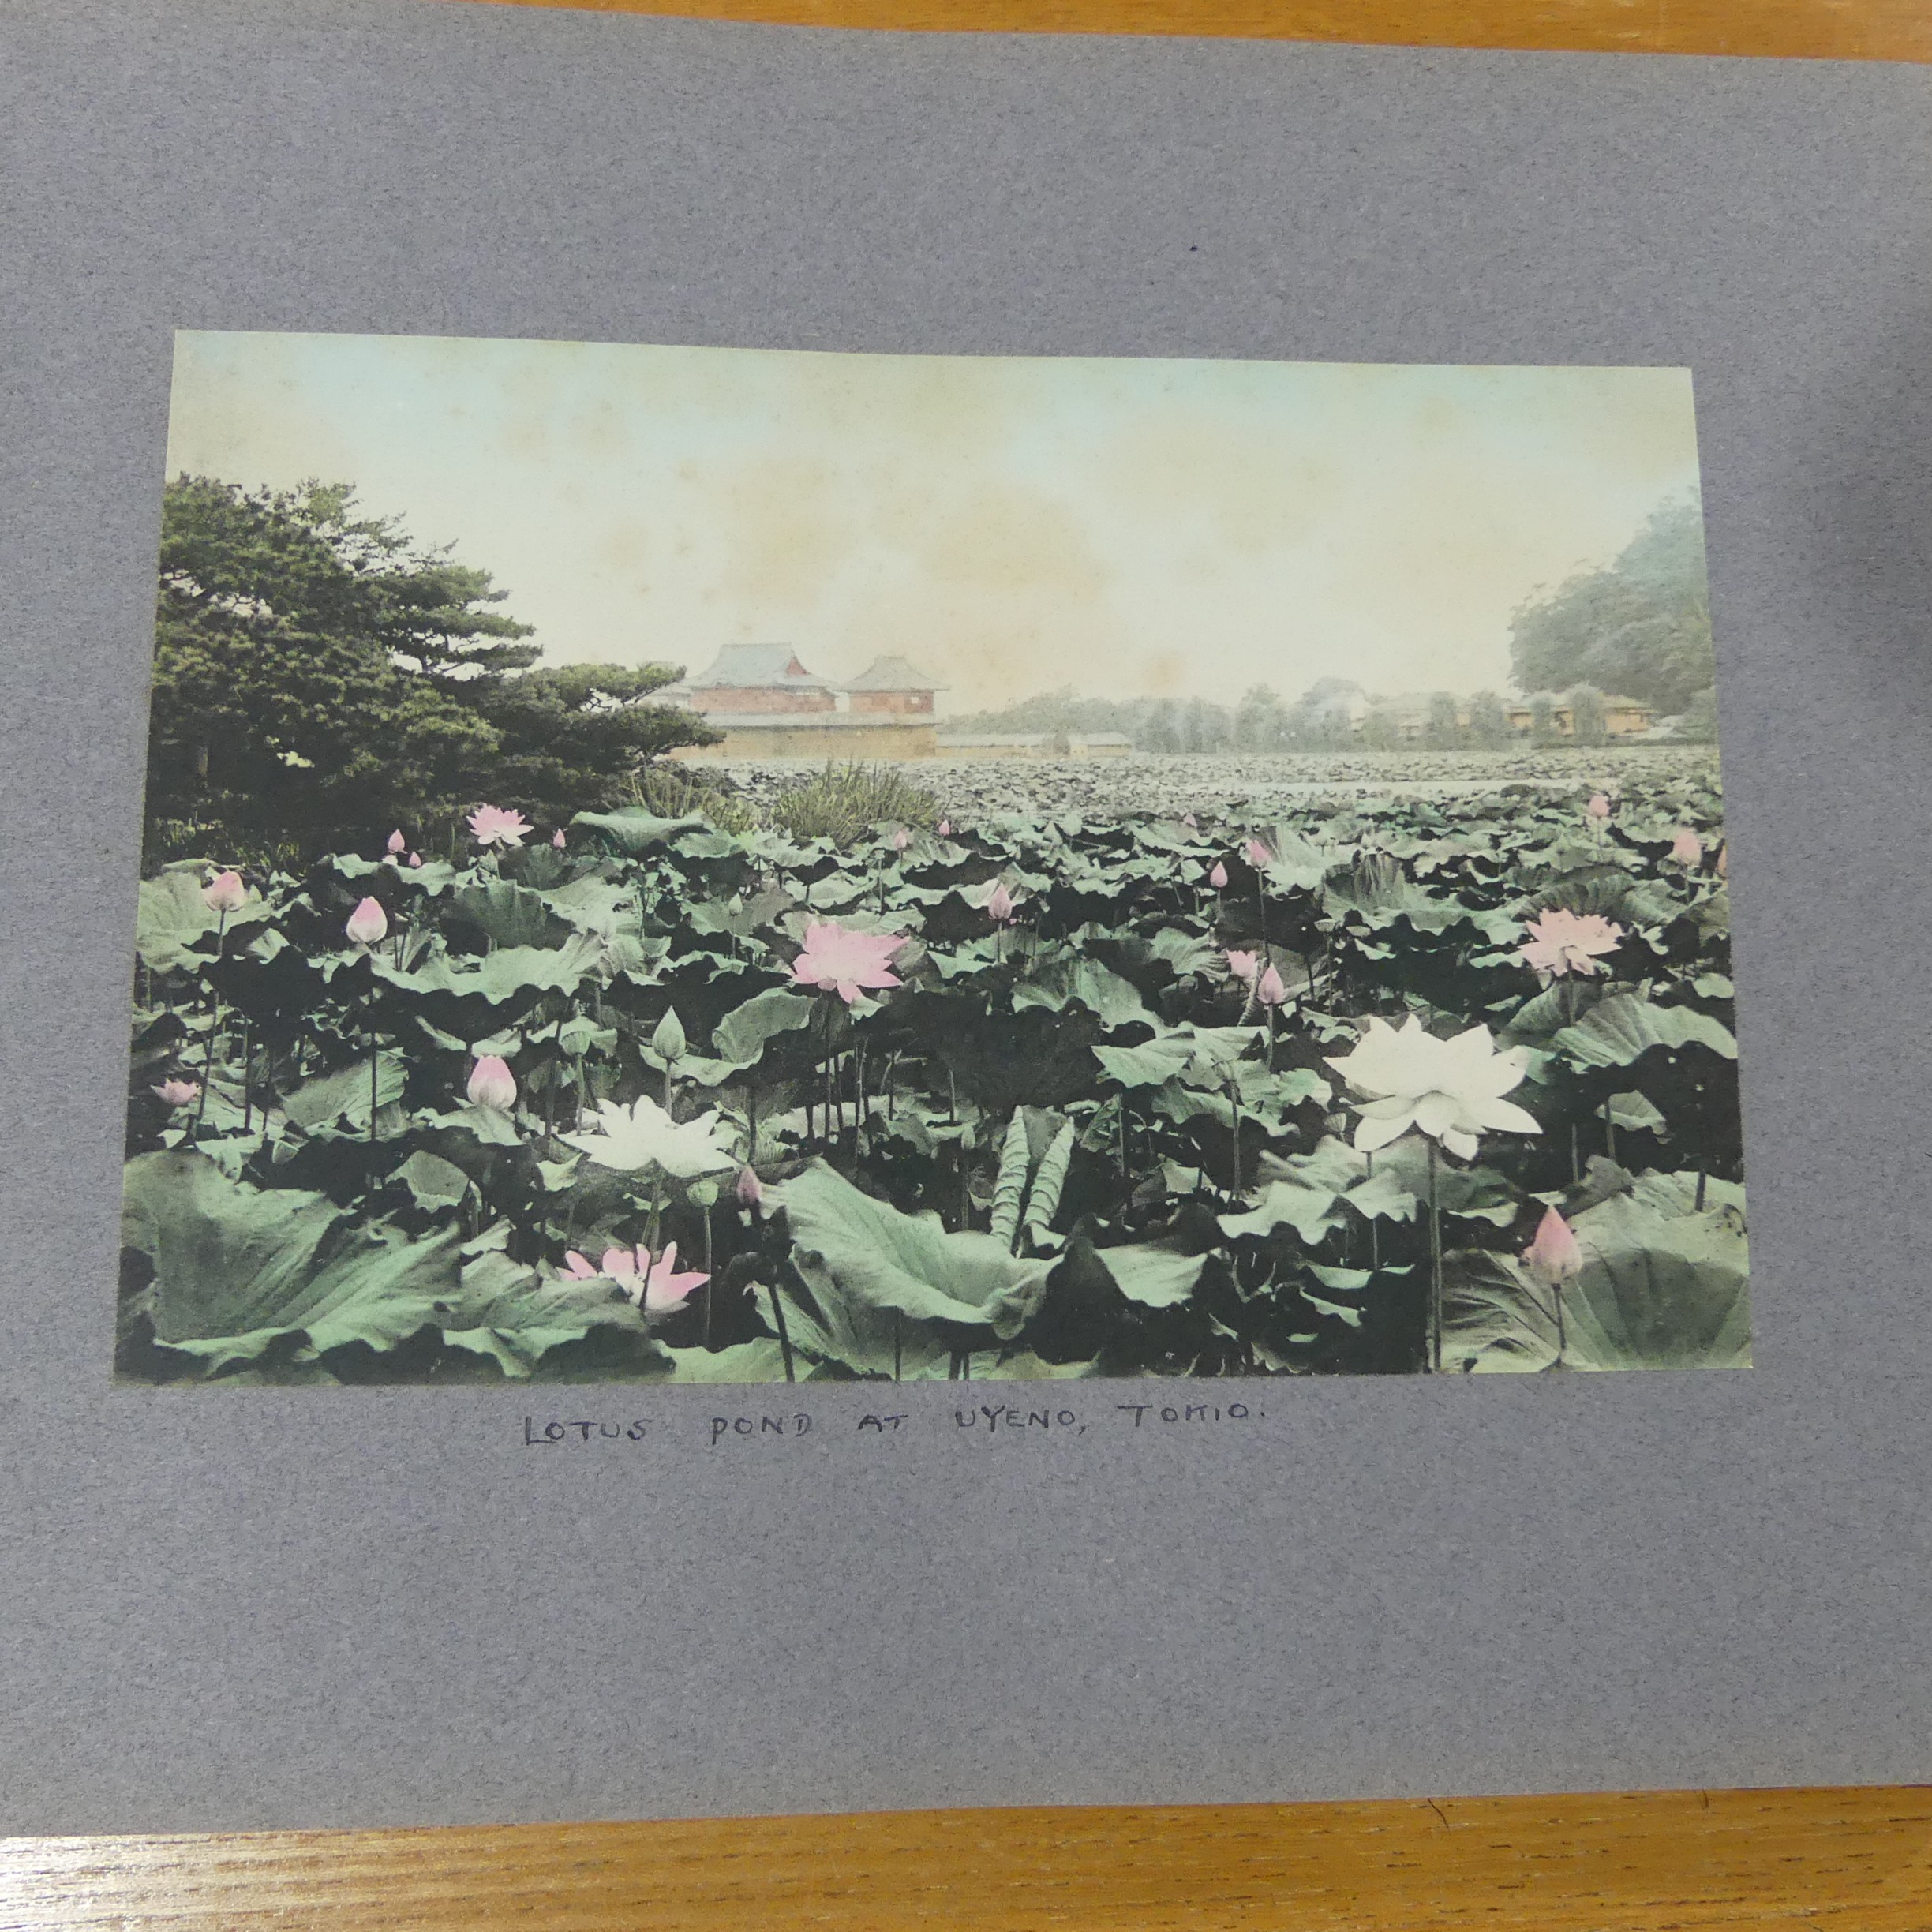 An album of early 20th century Japanese tinted photographs, depicting places, rural scenes, - Image 2 of 7